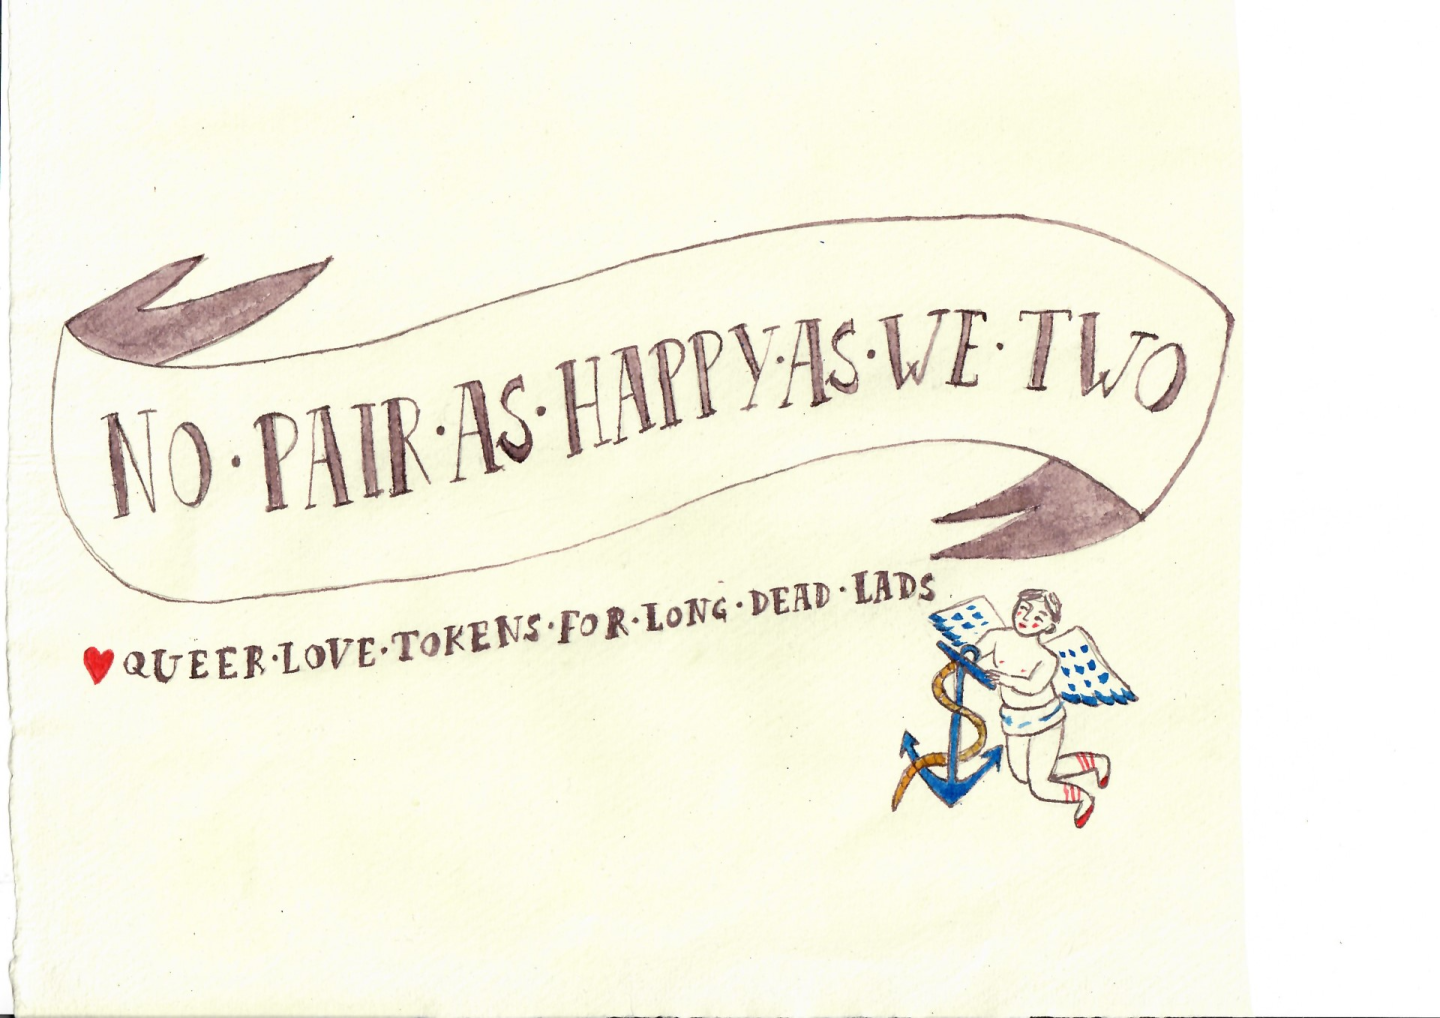 An Illustrated banner that reads 'No Pair as Happy as we Two: Queer Love Tokens for long dead lads' with an angel holding an anchor